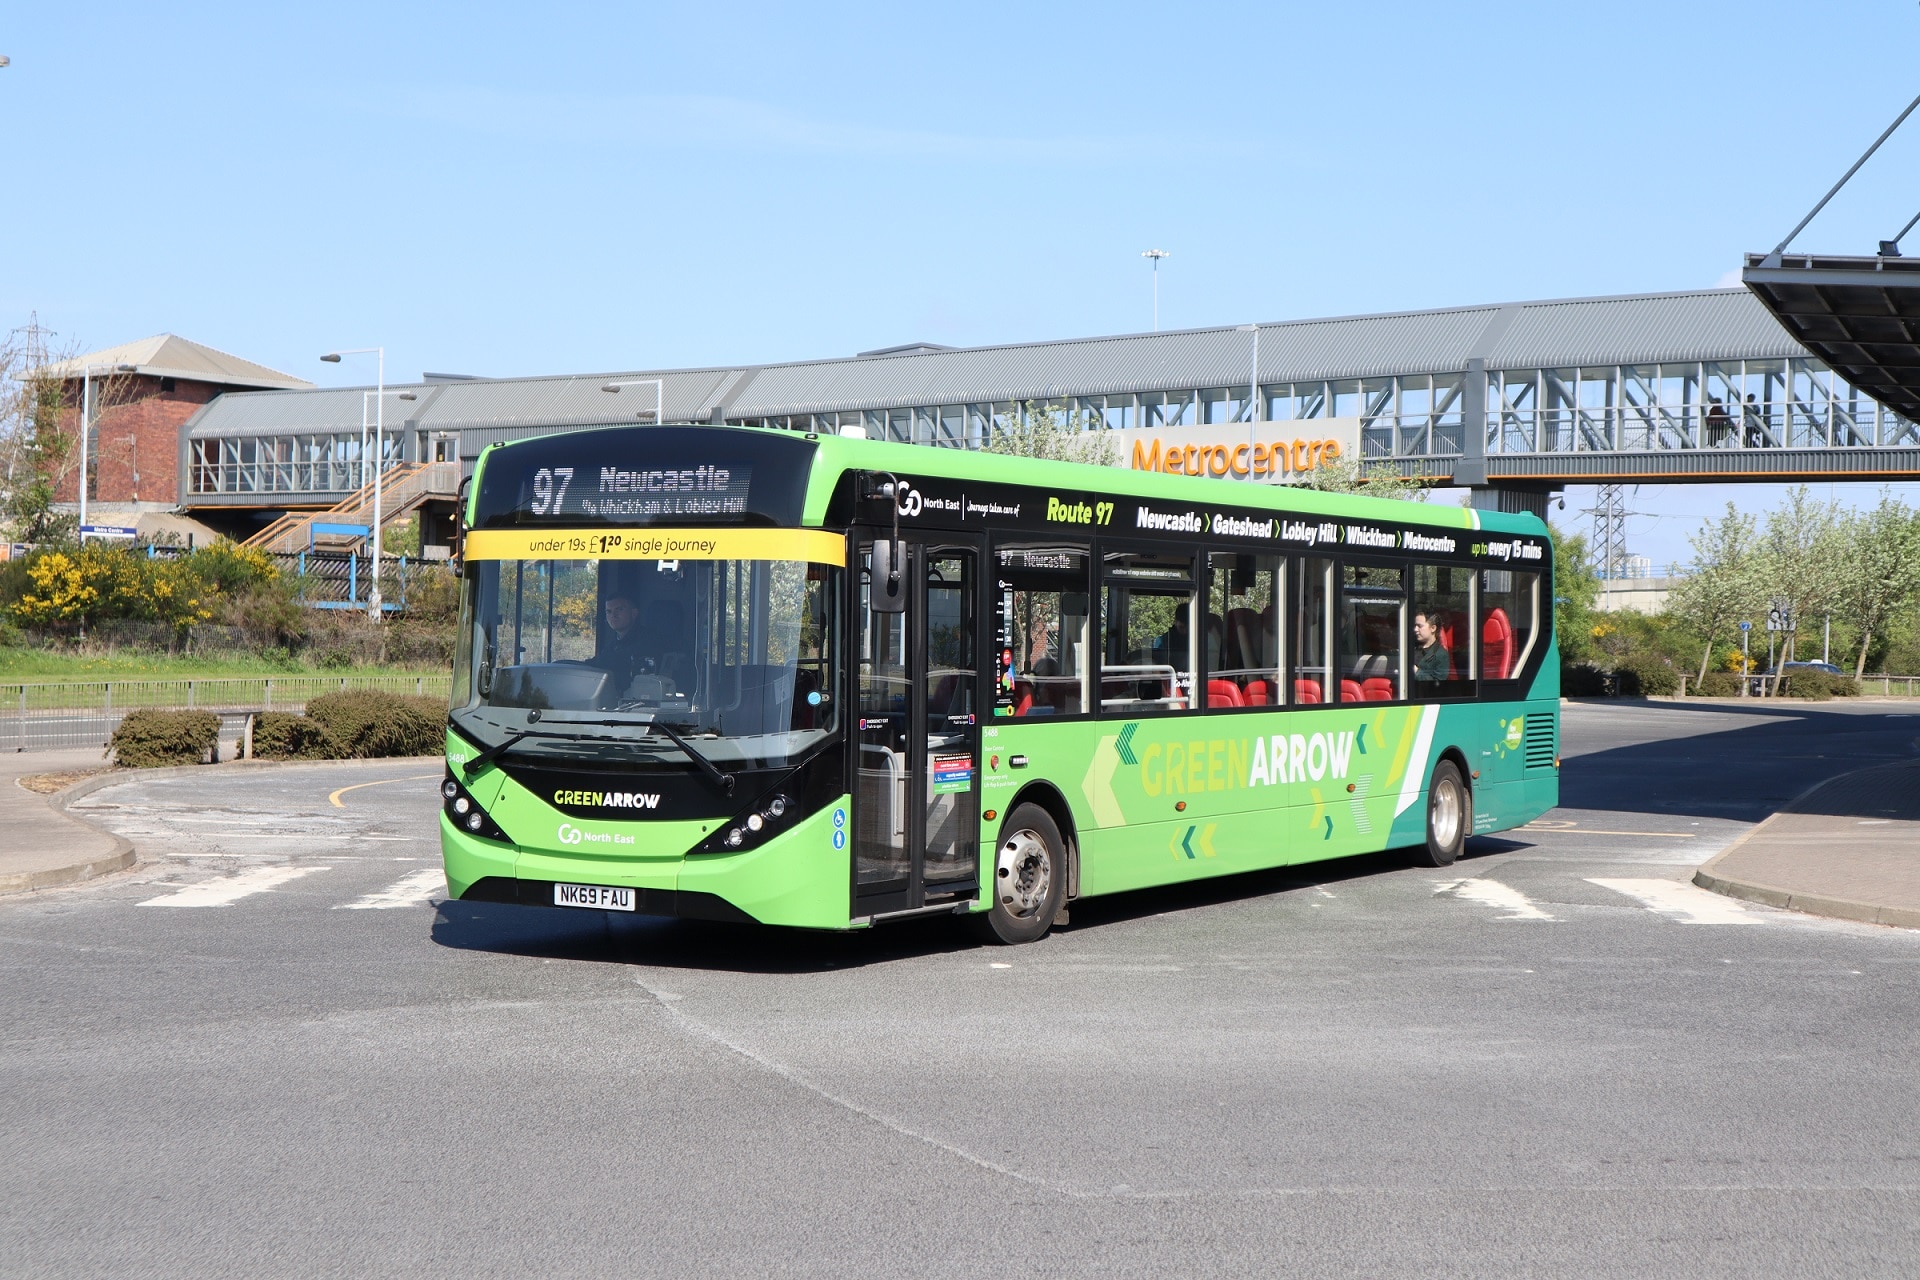 Bus recovery funding in England extended to October 2022